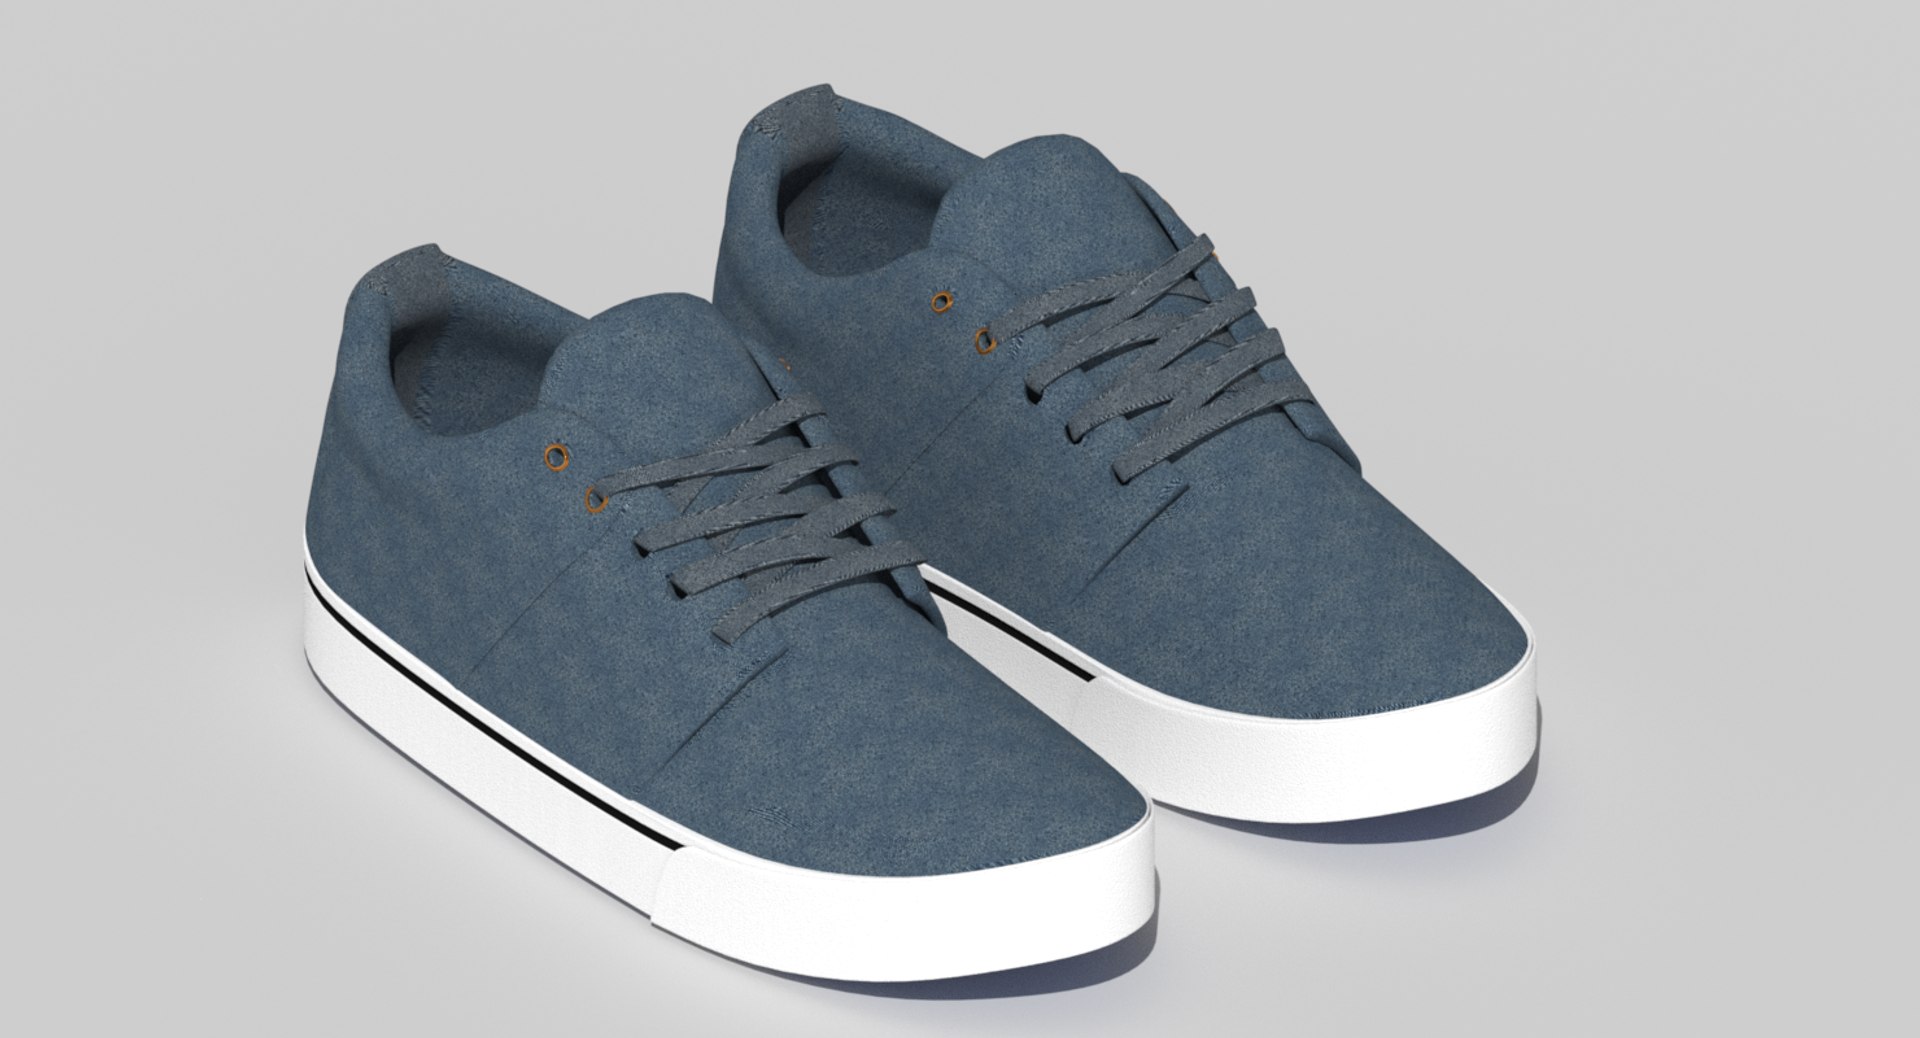 3d model of casual shoes